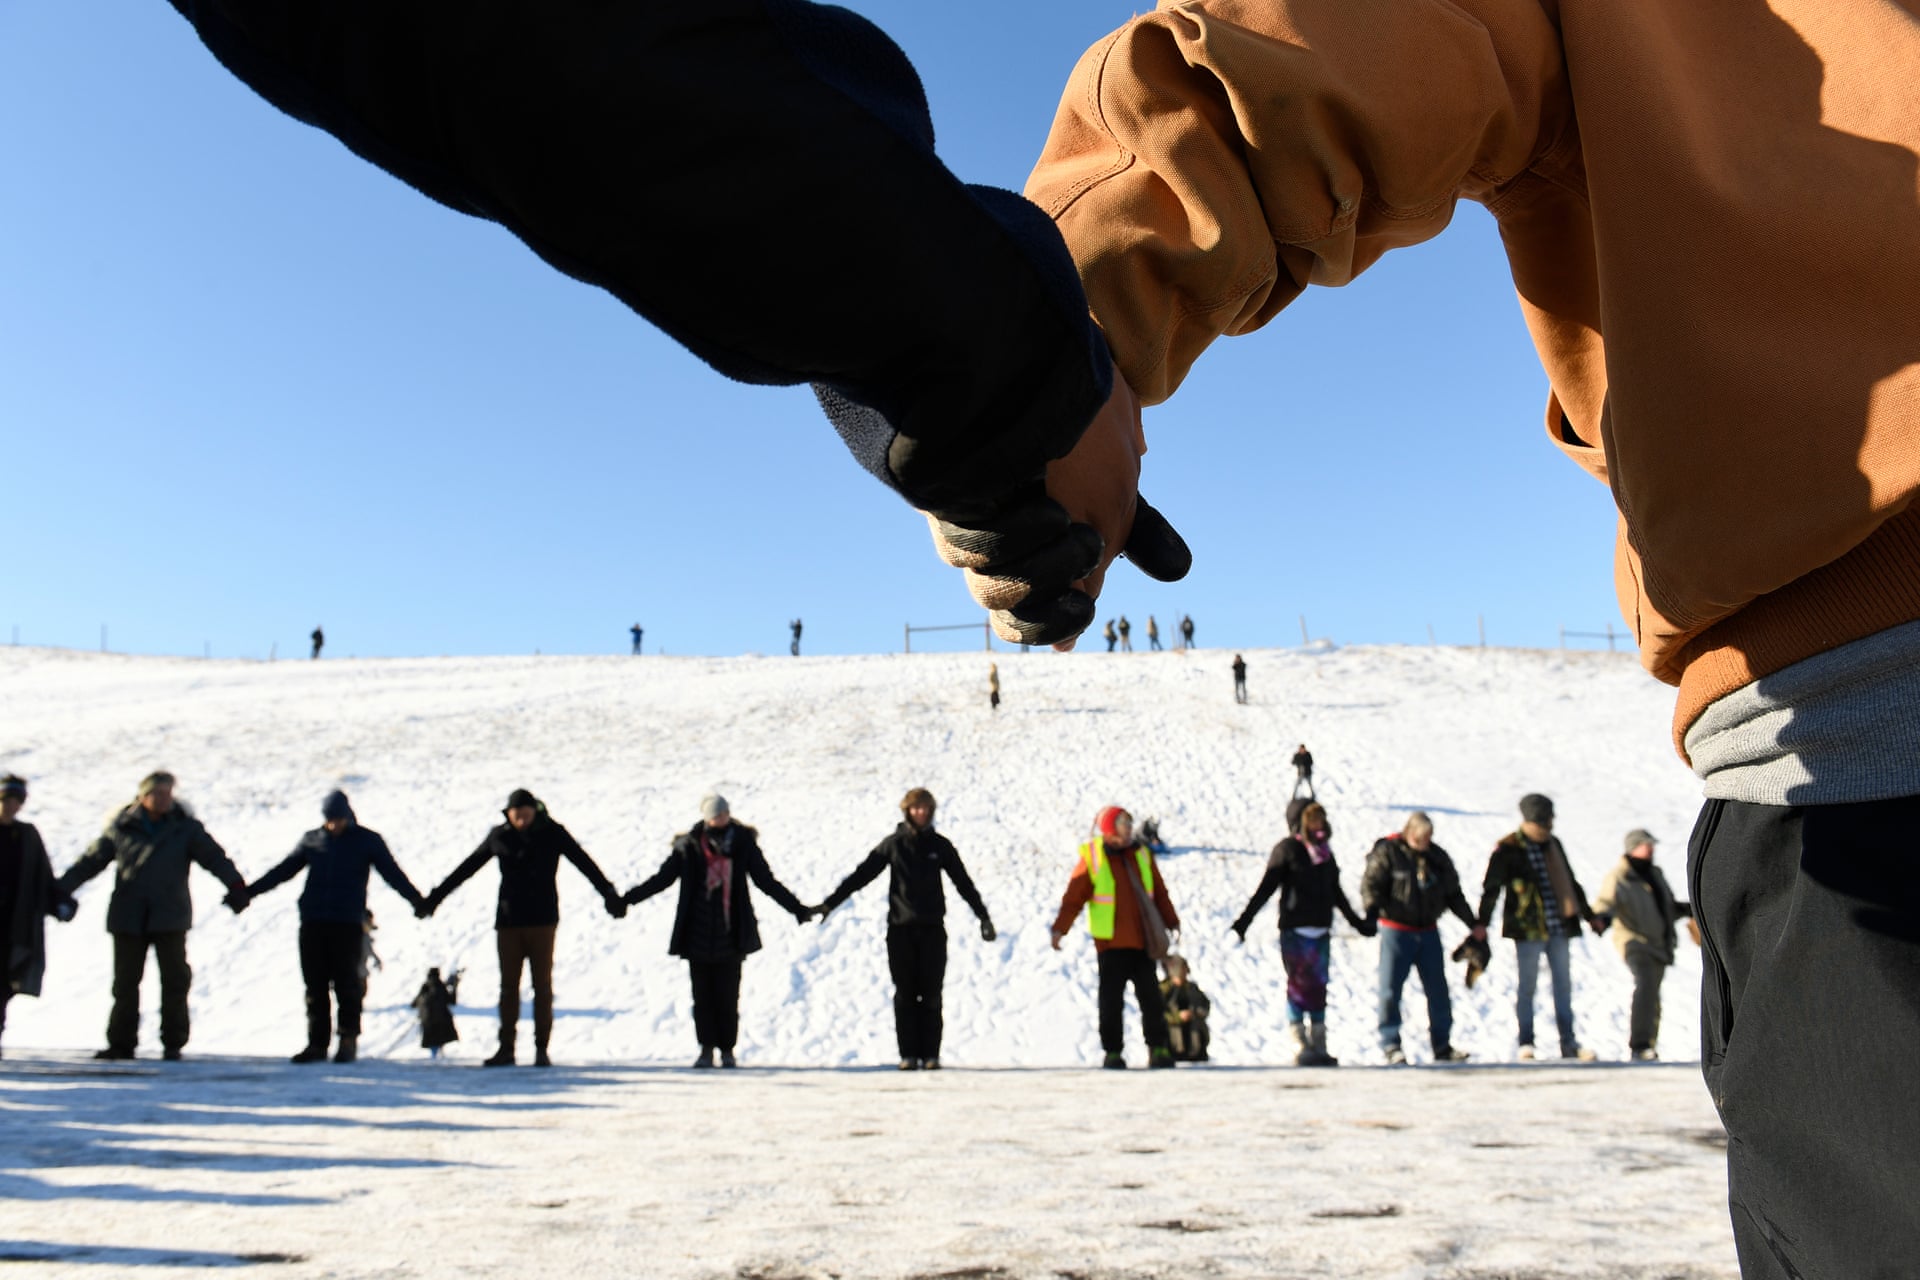 Native Americans and activists gathered outside Cannon Ball, North Dakota, to try to halt the construction of the Dakota Access Pipeline in 2016. Photograph: Helen H. Richardson/Denver Post via Getty Images